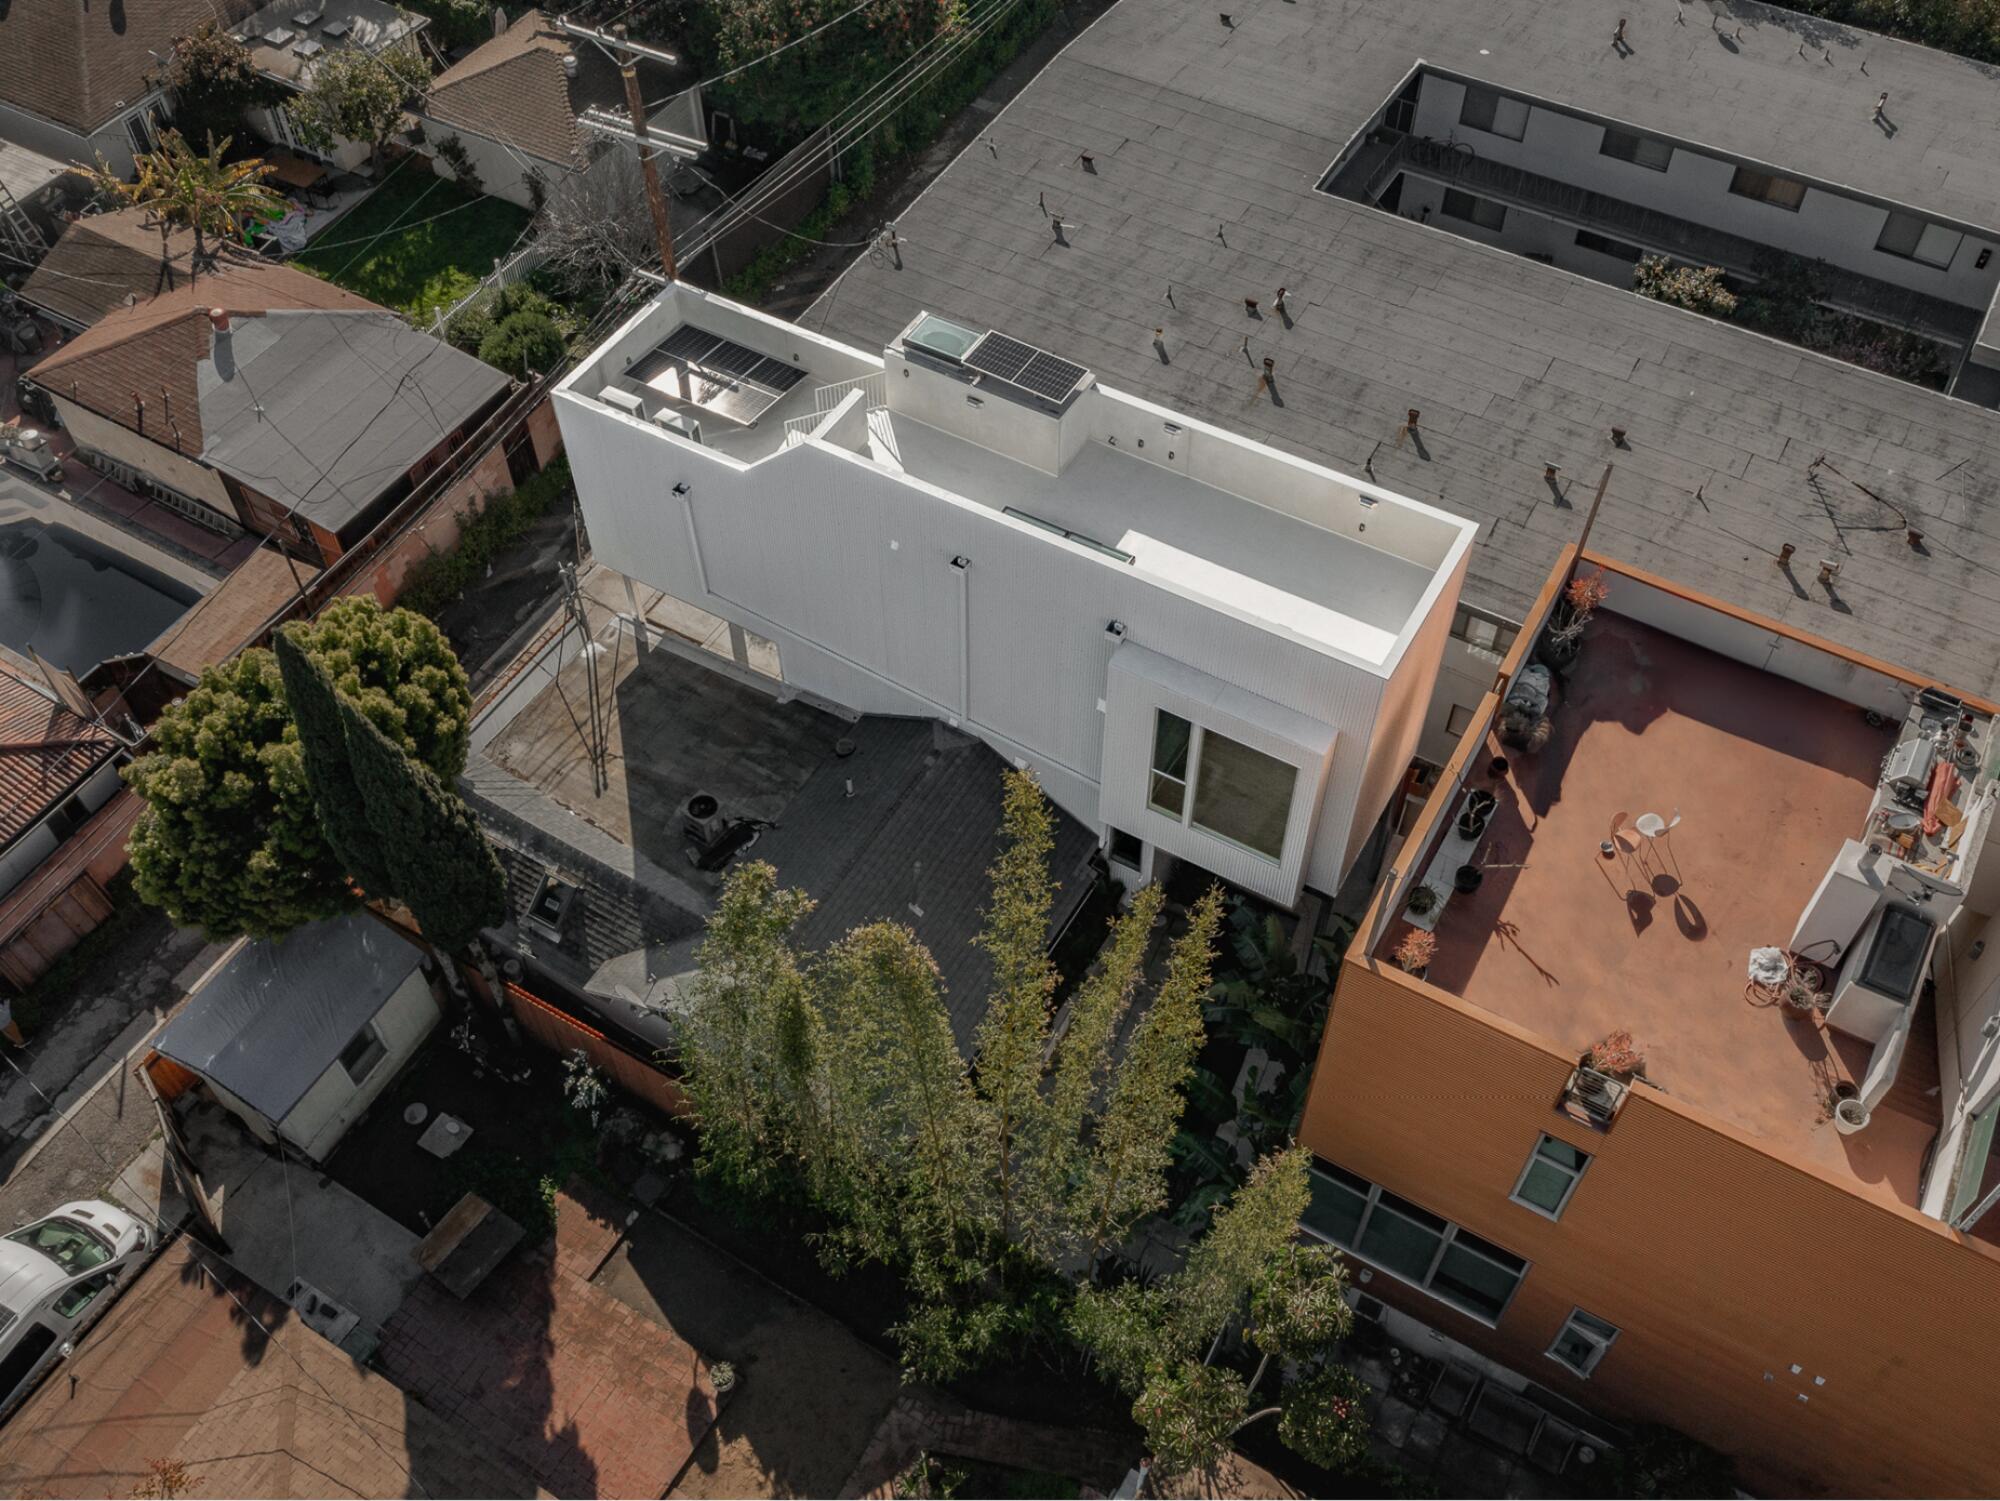 A drone shot shows a two-story ADU slipped in between a bungalow and a modern duplex